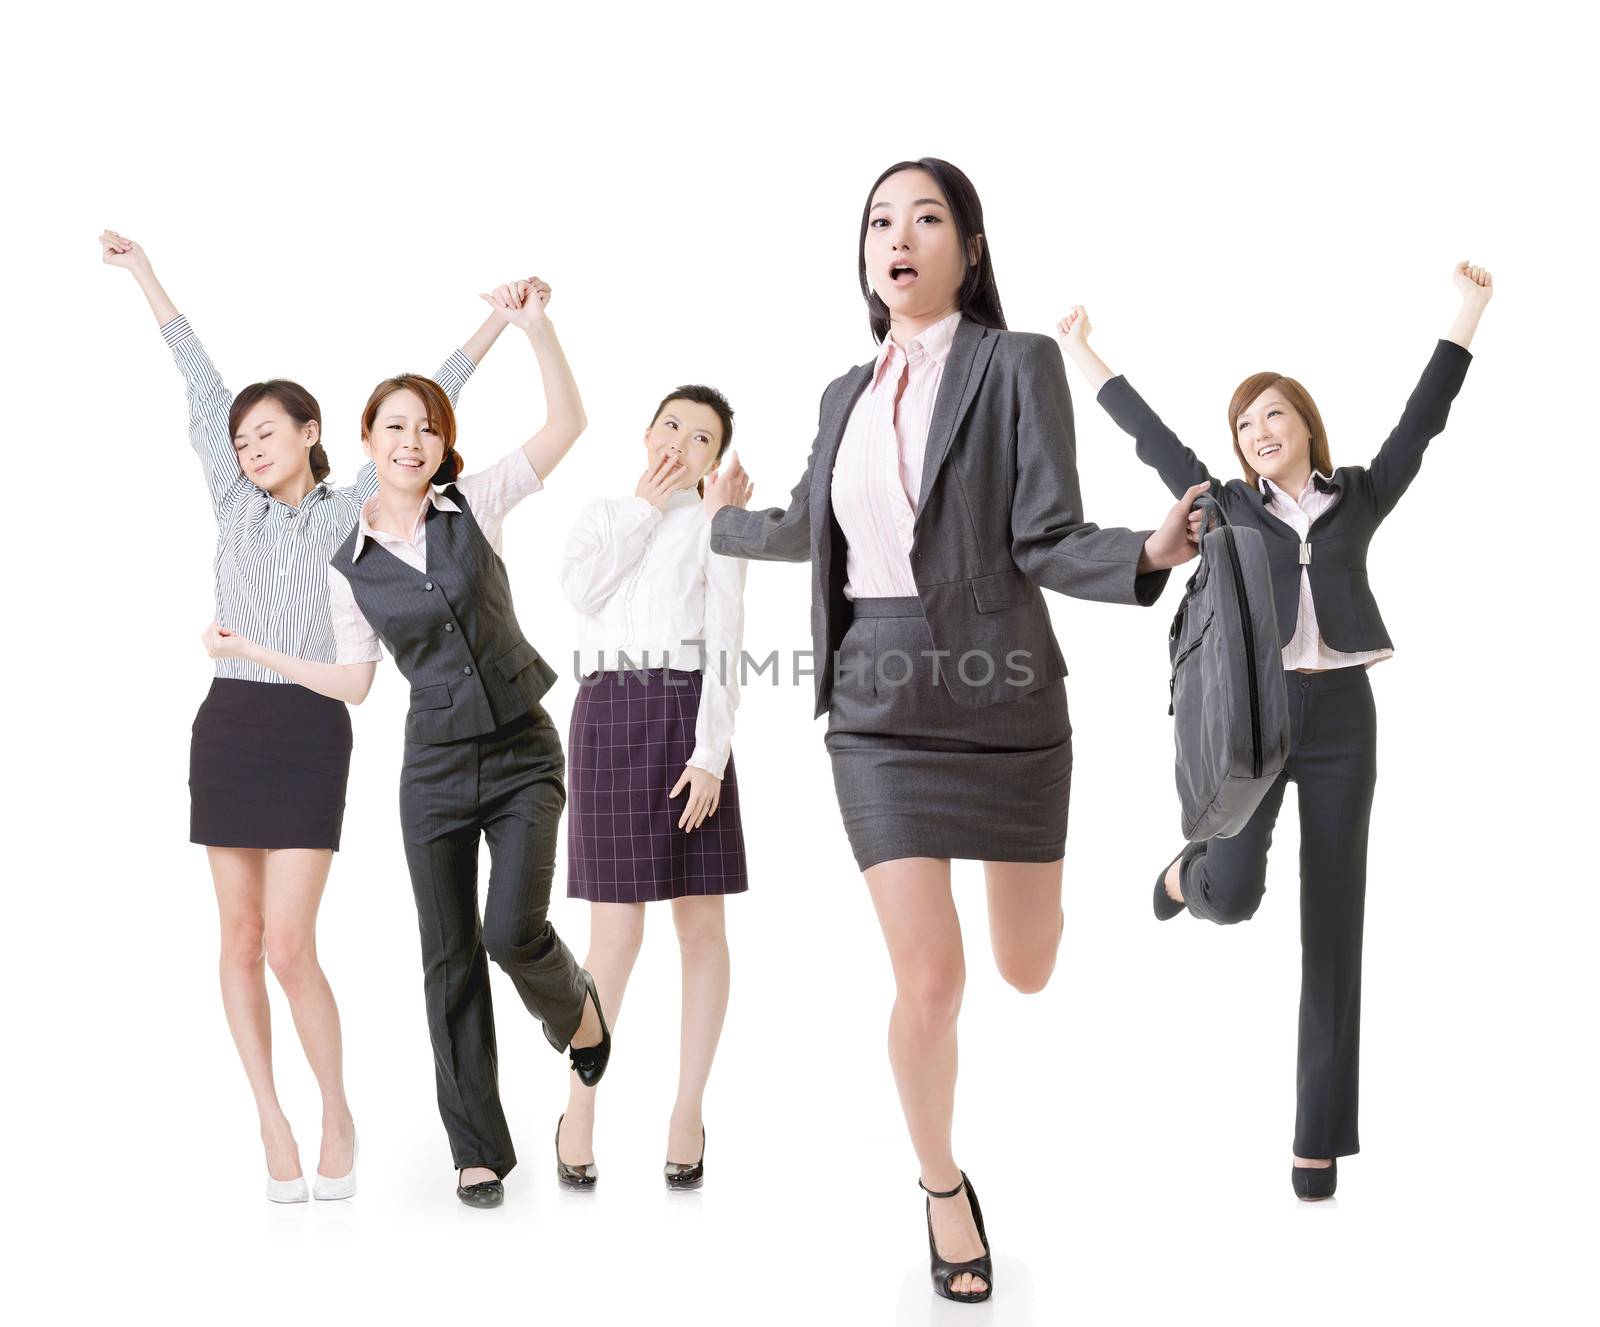 Running business woman lead her excited team, full length portrait of group people isolated on white background.